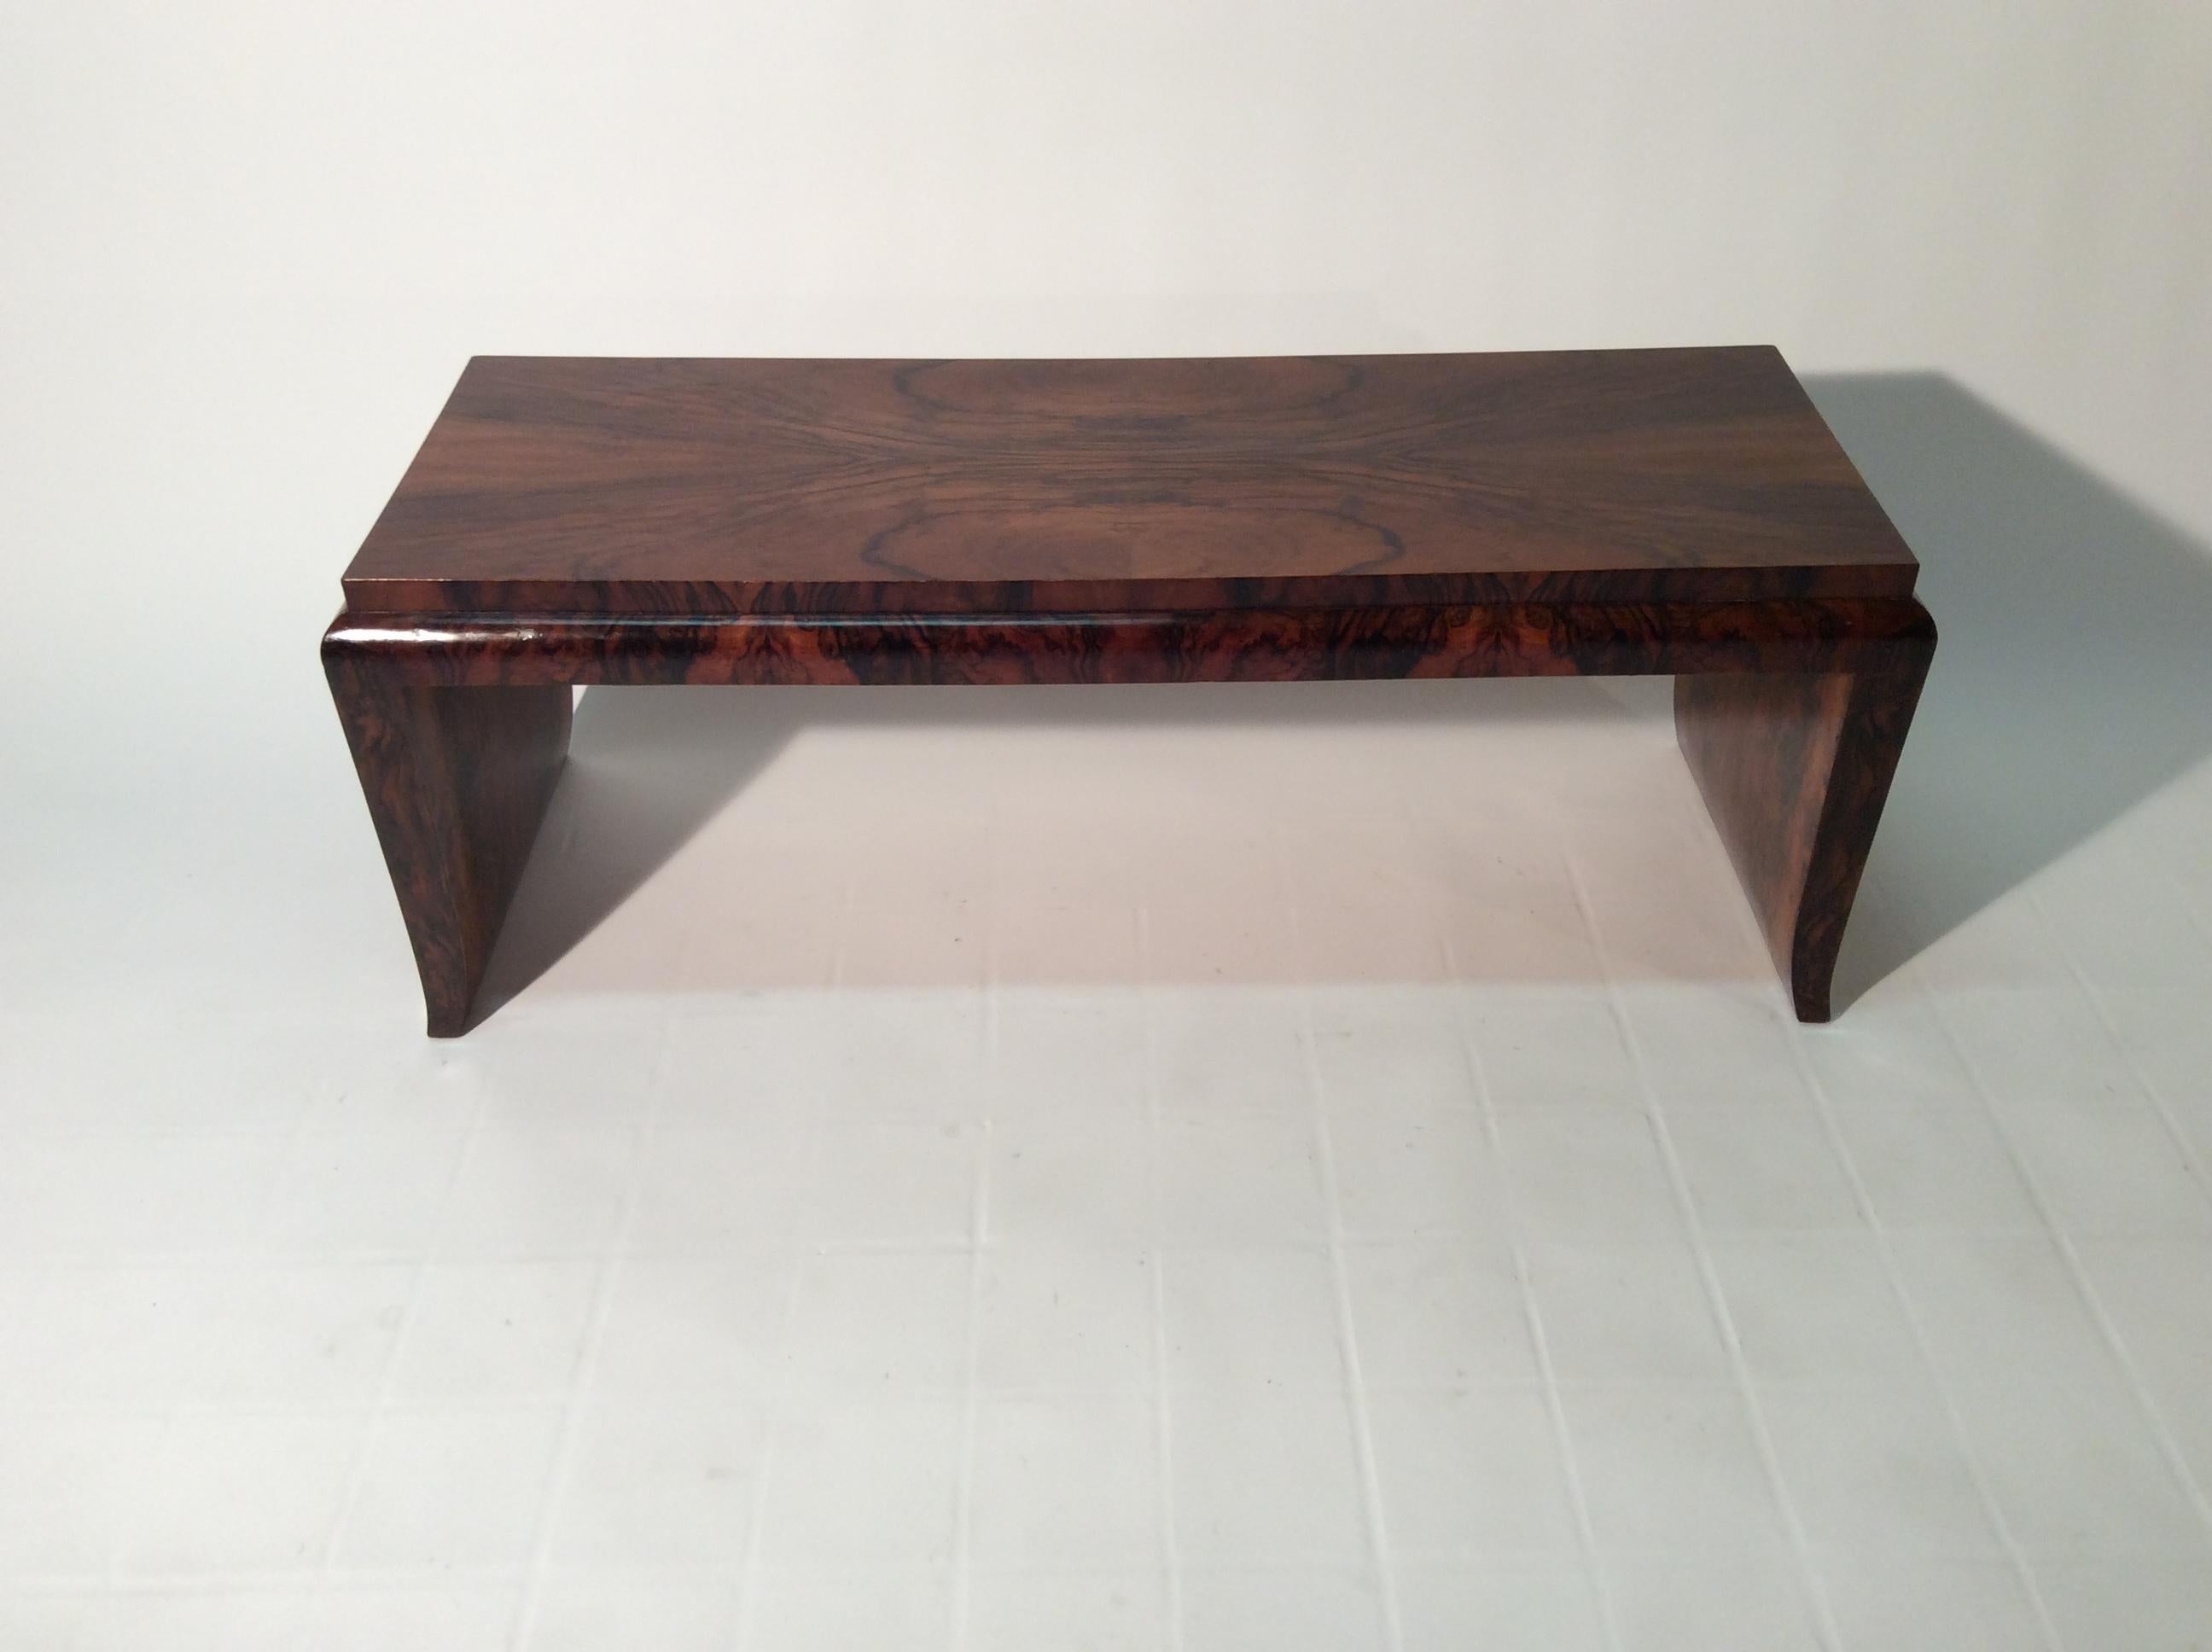 Wood Art Deco Rectangular Coffee Table or Bench with Precious and Elegant Material